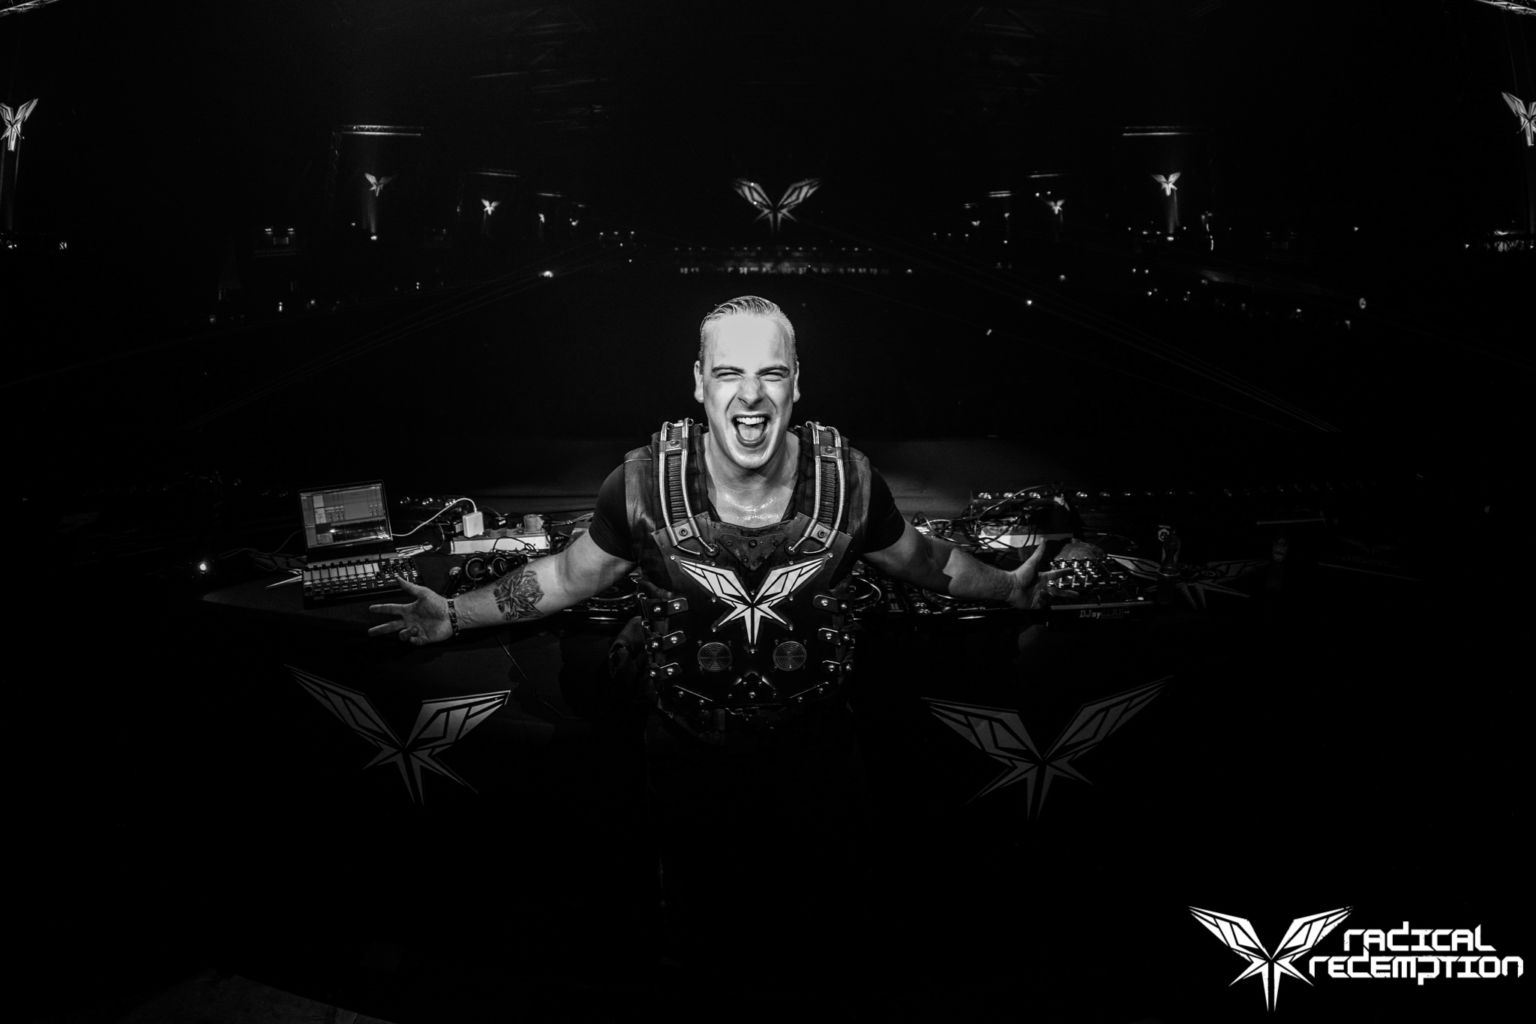 Why Radical Redemption fans don’t want to miss the ‘Command & Conquer’ event